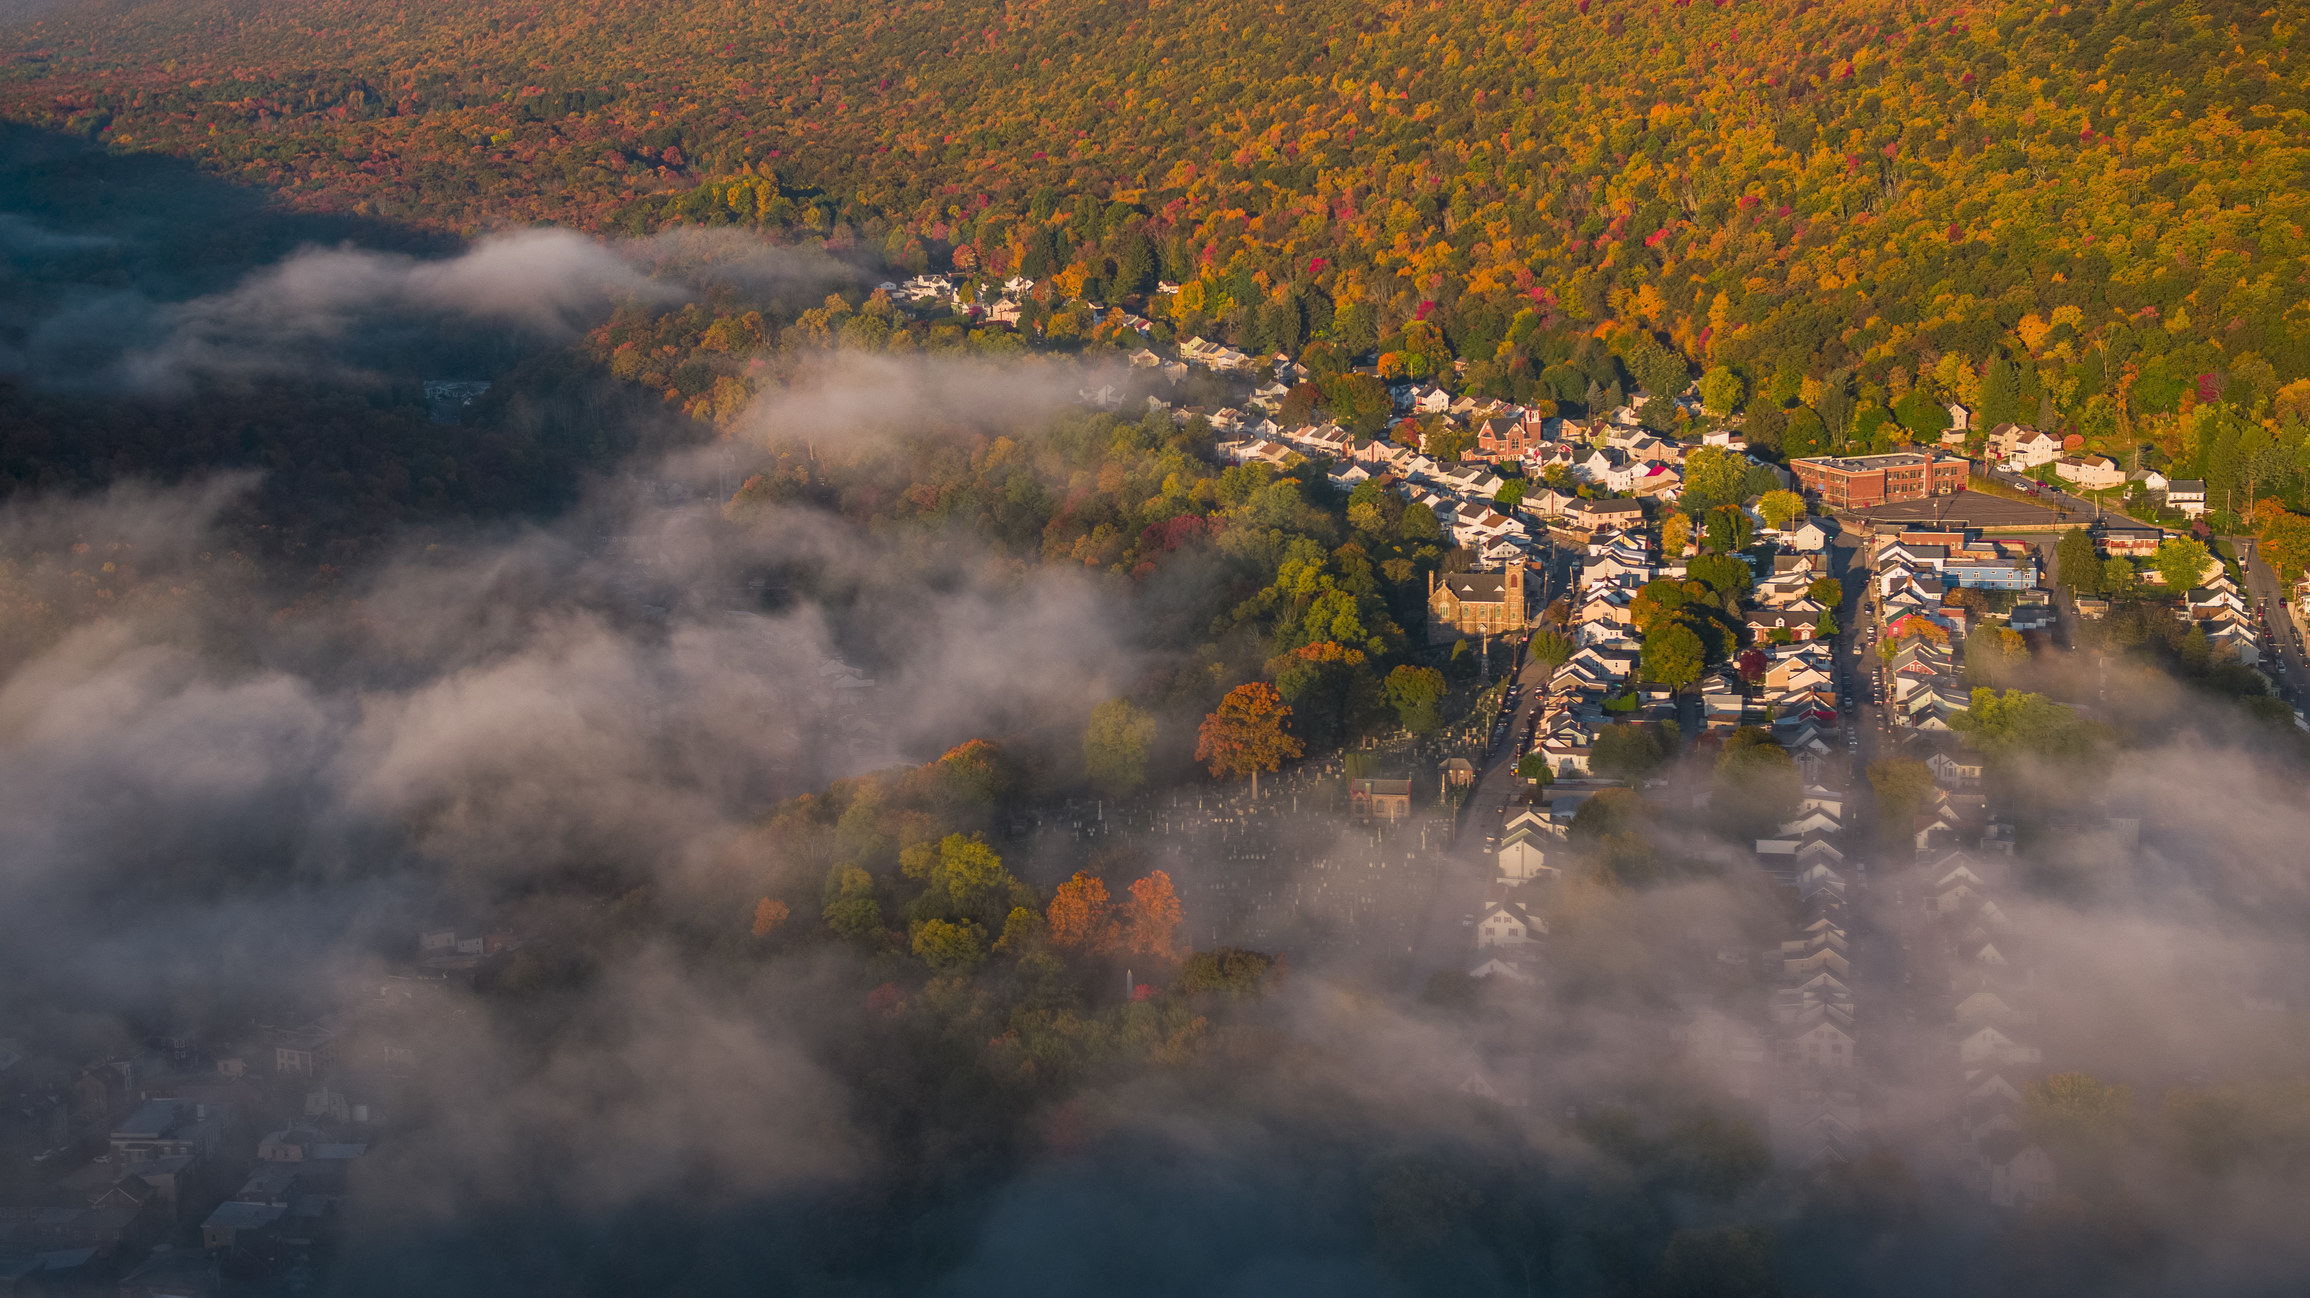 Low clouds in the Pocono Mountains over Jim Thorpe, PA.